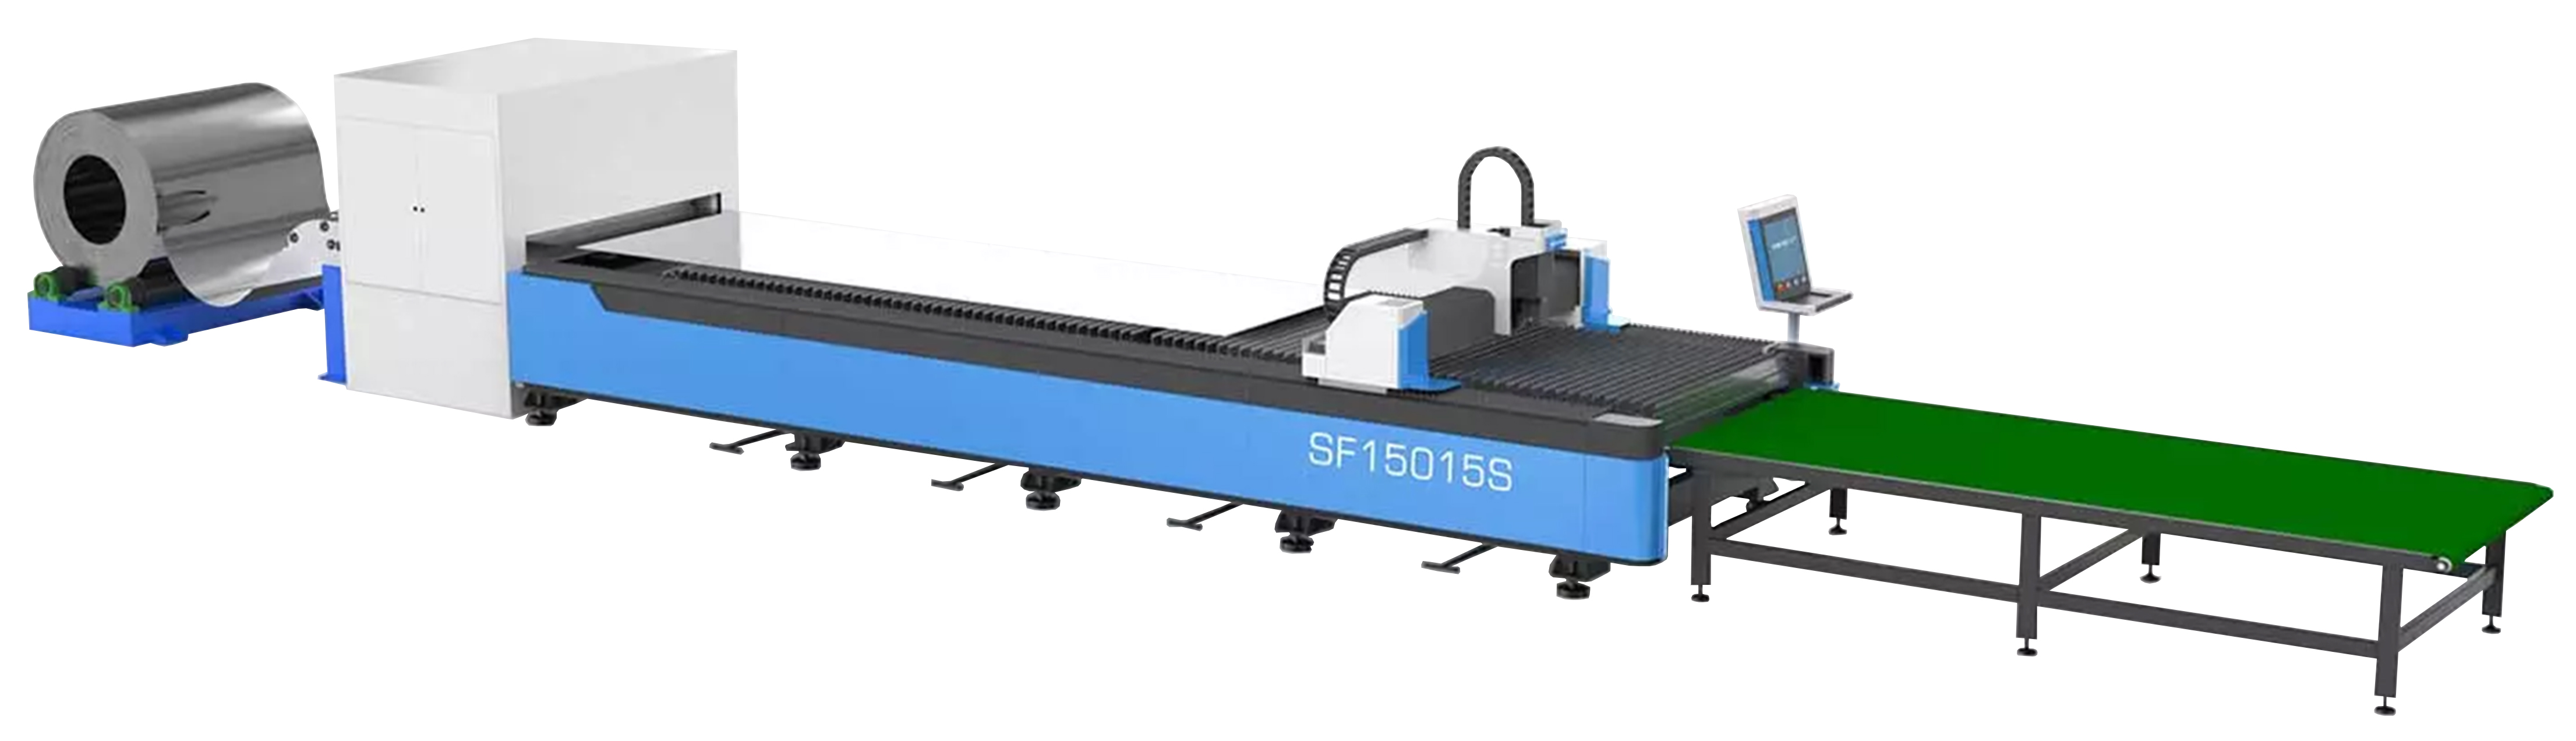 SF15015S TECHNICAL SOLUTIONS